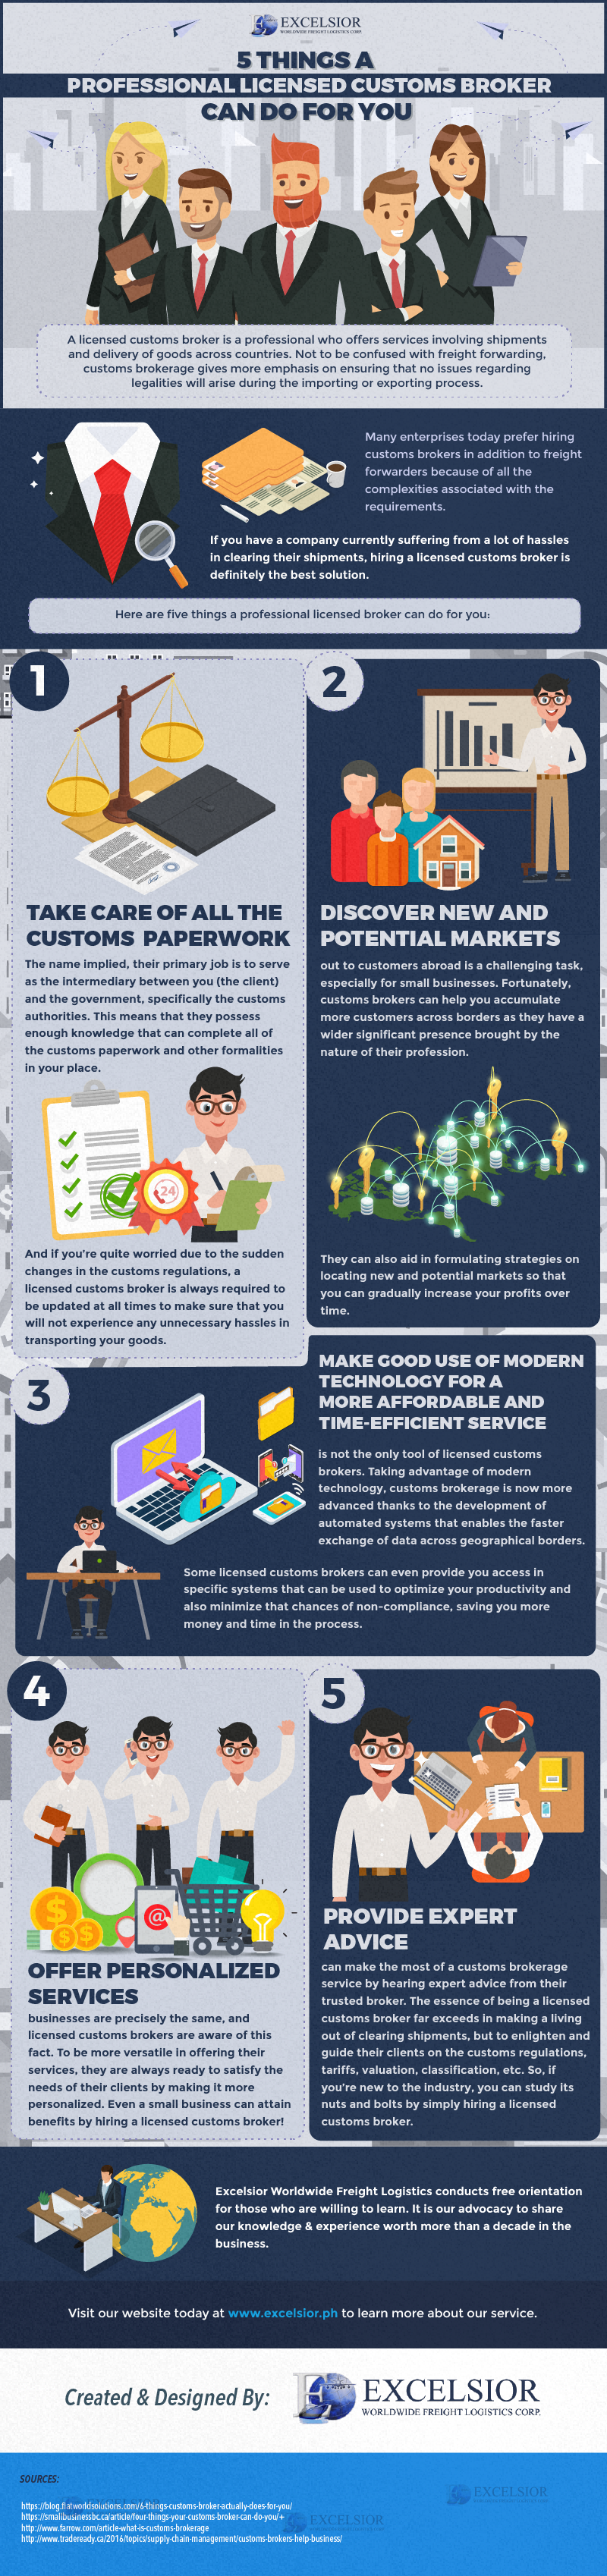 5 Things A Professional Licensed Customs Broker Can Do For You - Infographic